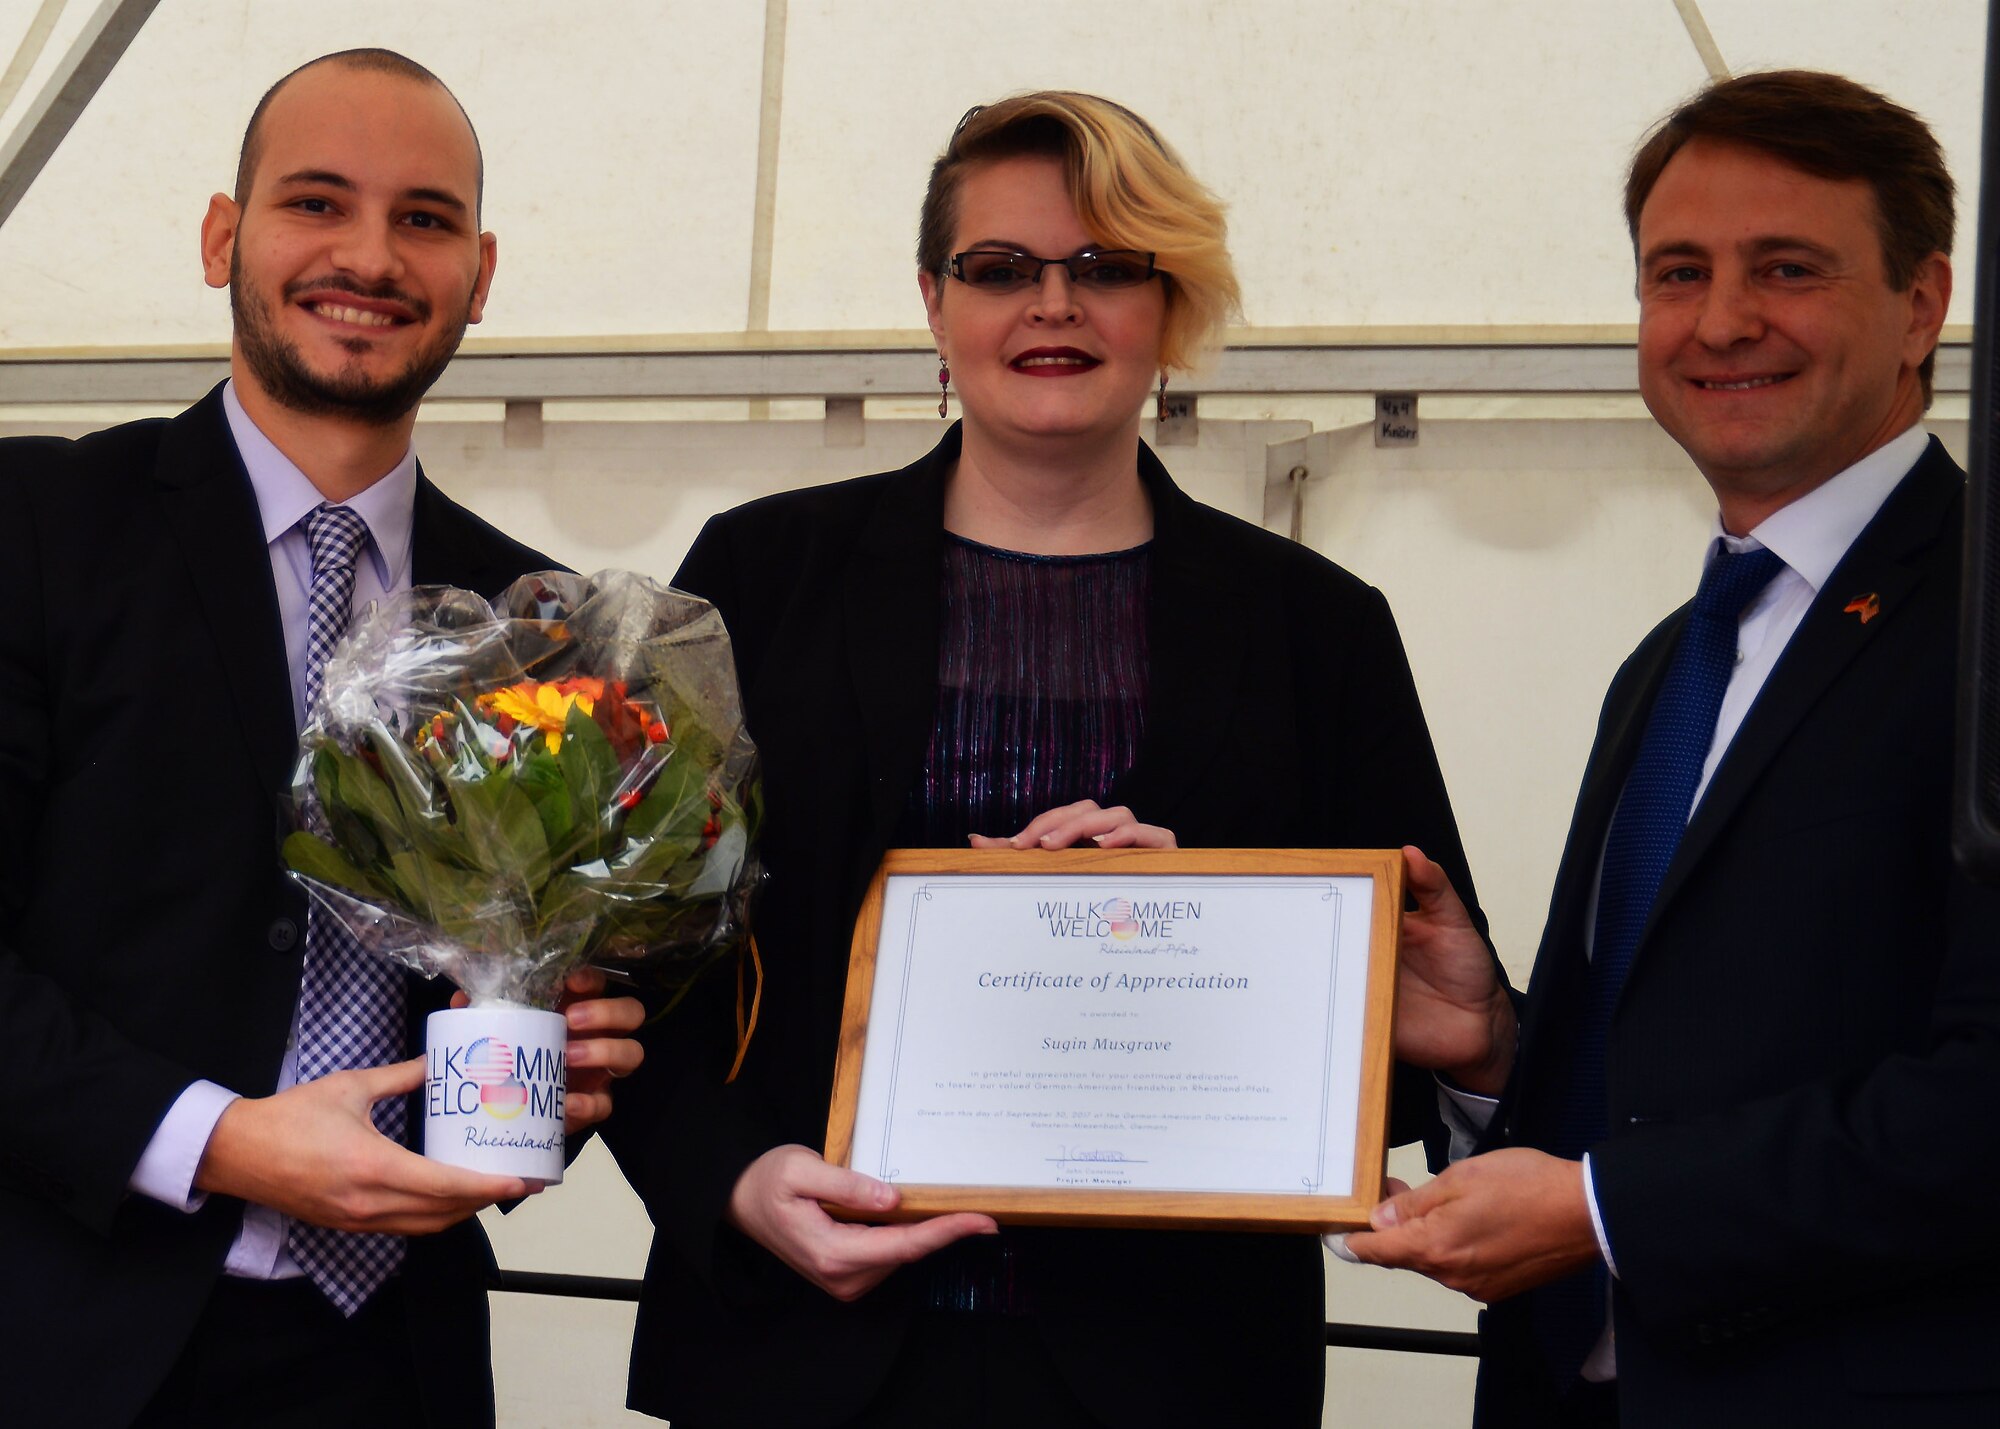 Sugin Musgrave, Kaisersluatern Military Community spouse, receives a certificate of appreciation from John Constance, left, Atlantic Academy project manager, and David Sirakov, right, director of Atlantische Akademie, in Ramstein-Miesenbach Germany, Sept. 30, 2017. Musgrave contributed her time and knowledge to support U.S. families who were adjusting to living in Germany.